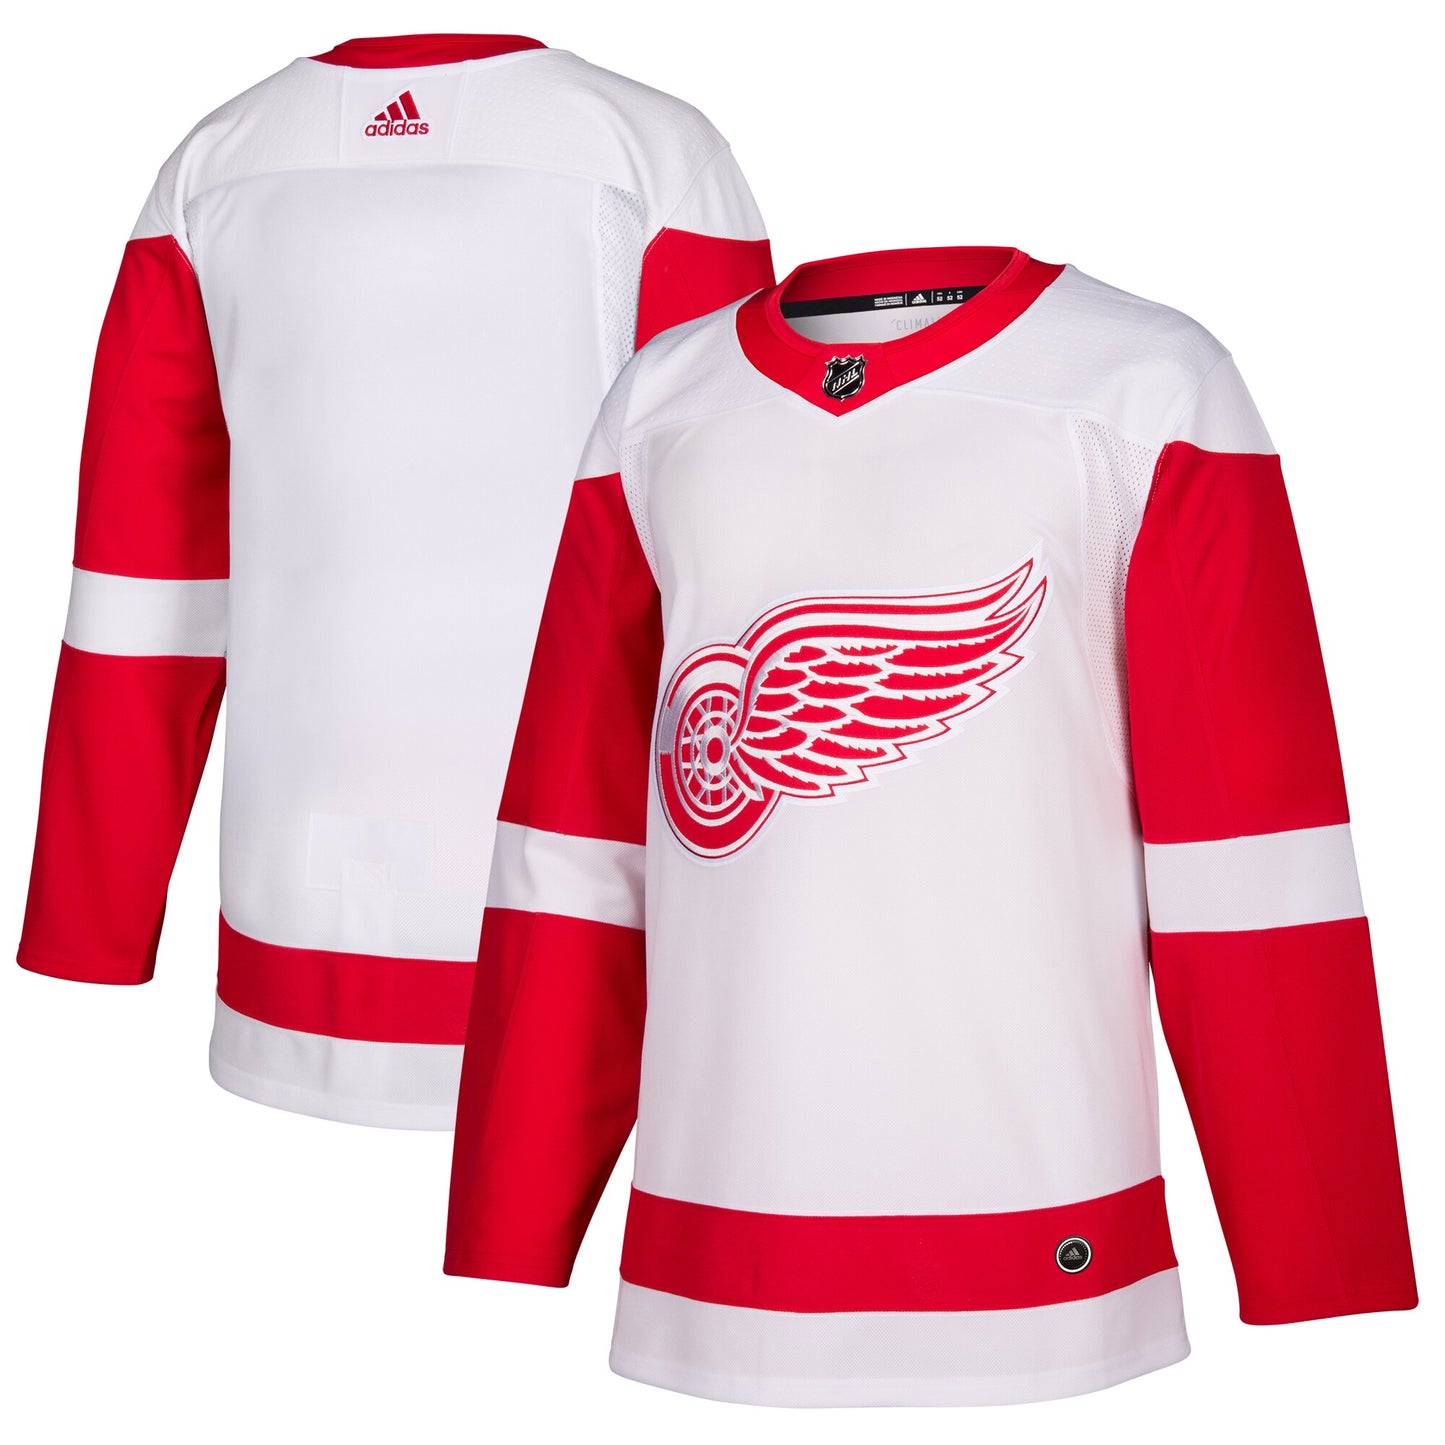 Detroit Red Wings adidas Away Authentic Blank Jersey - White